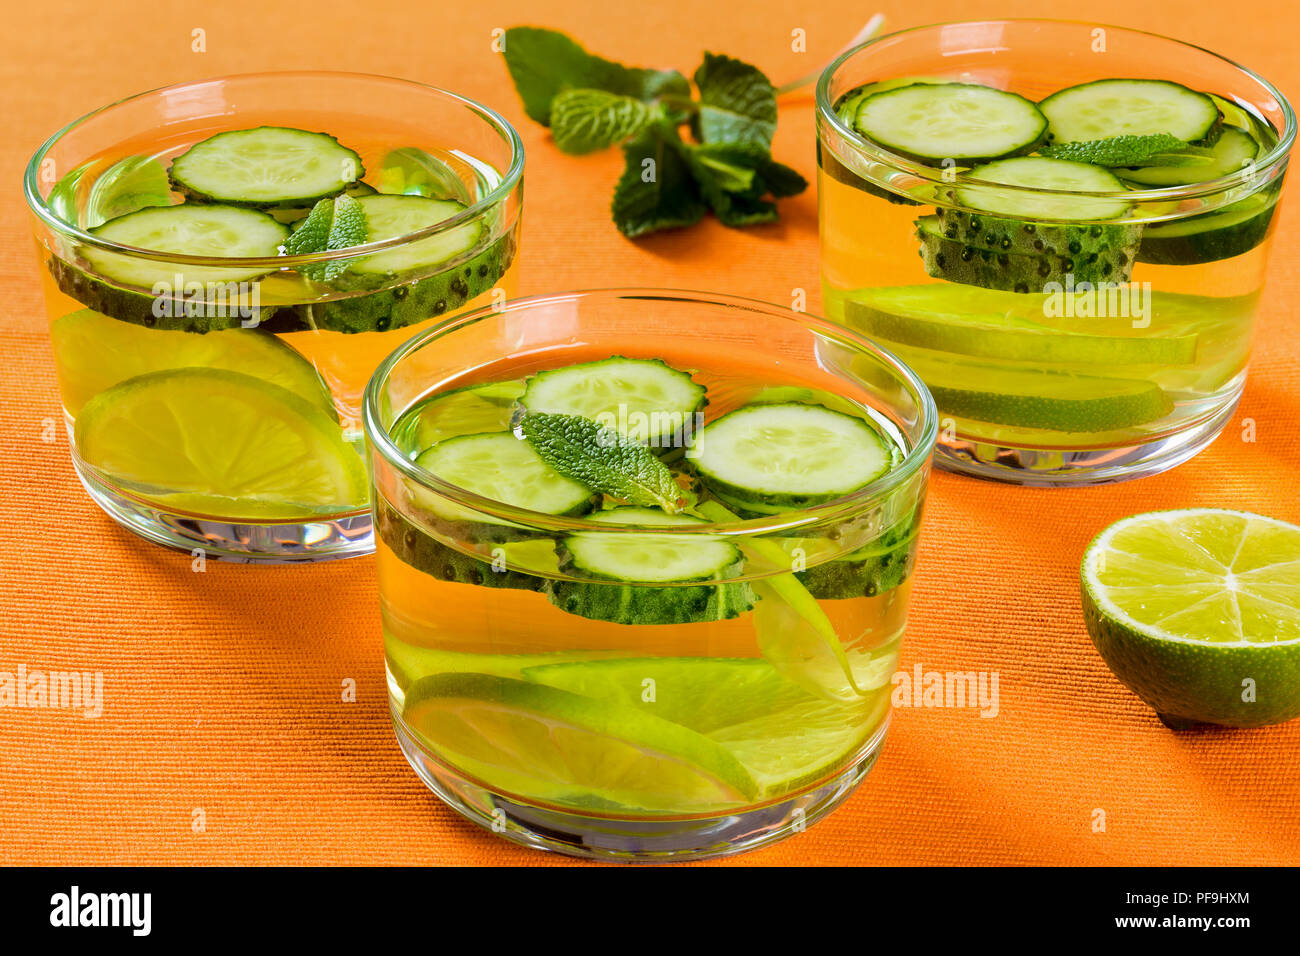 Very Fat Burning Detox Drink - Sassy Water: sliced cucumber, lime and mint in the glasses Stock Photo